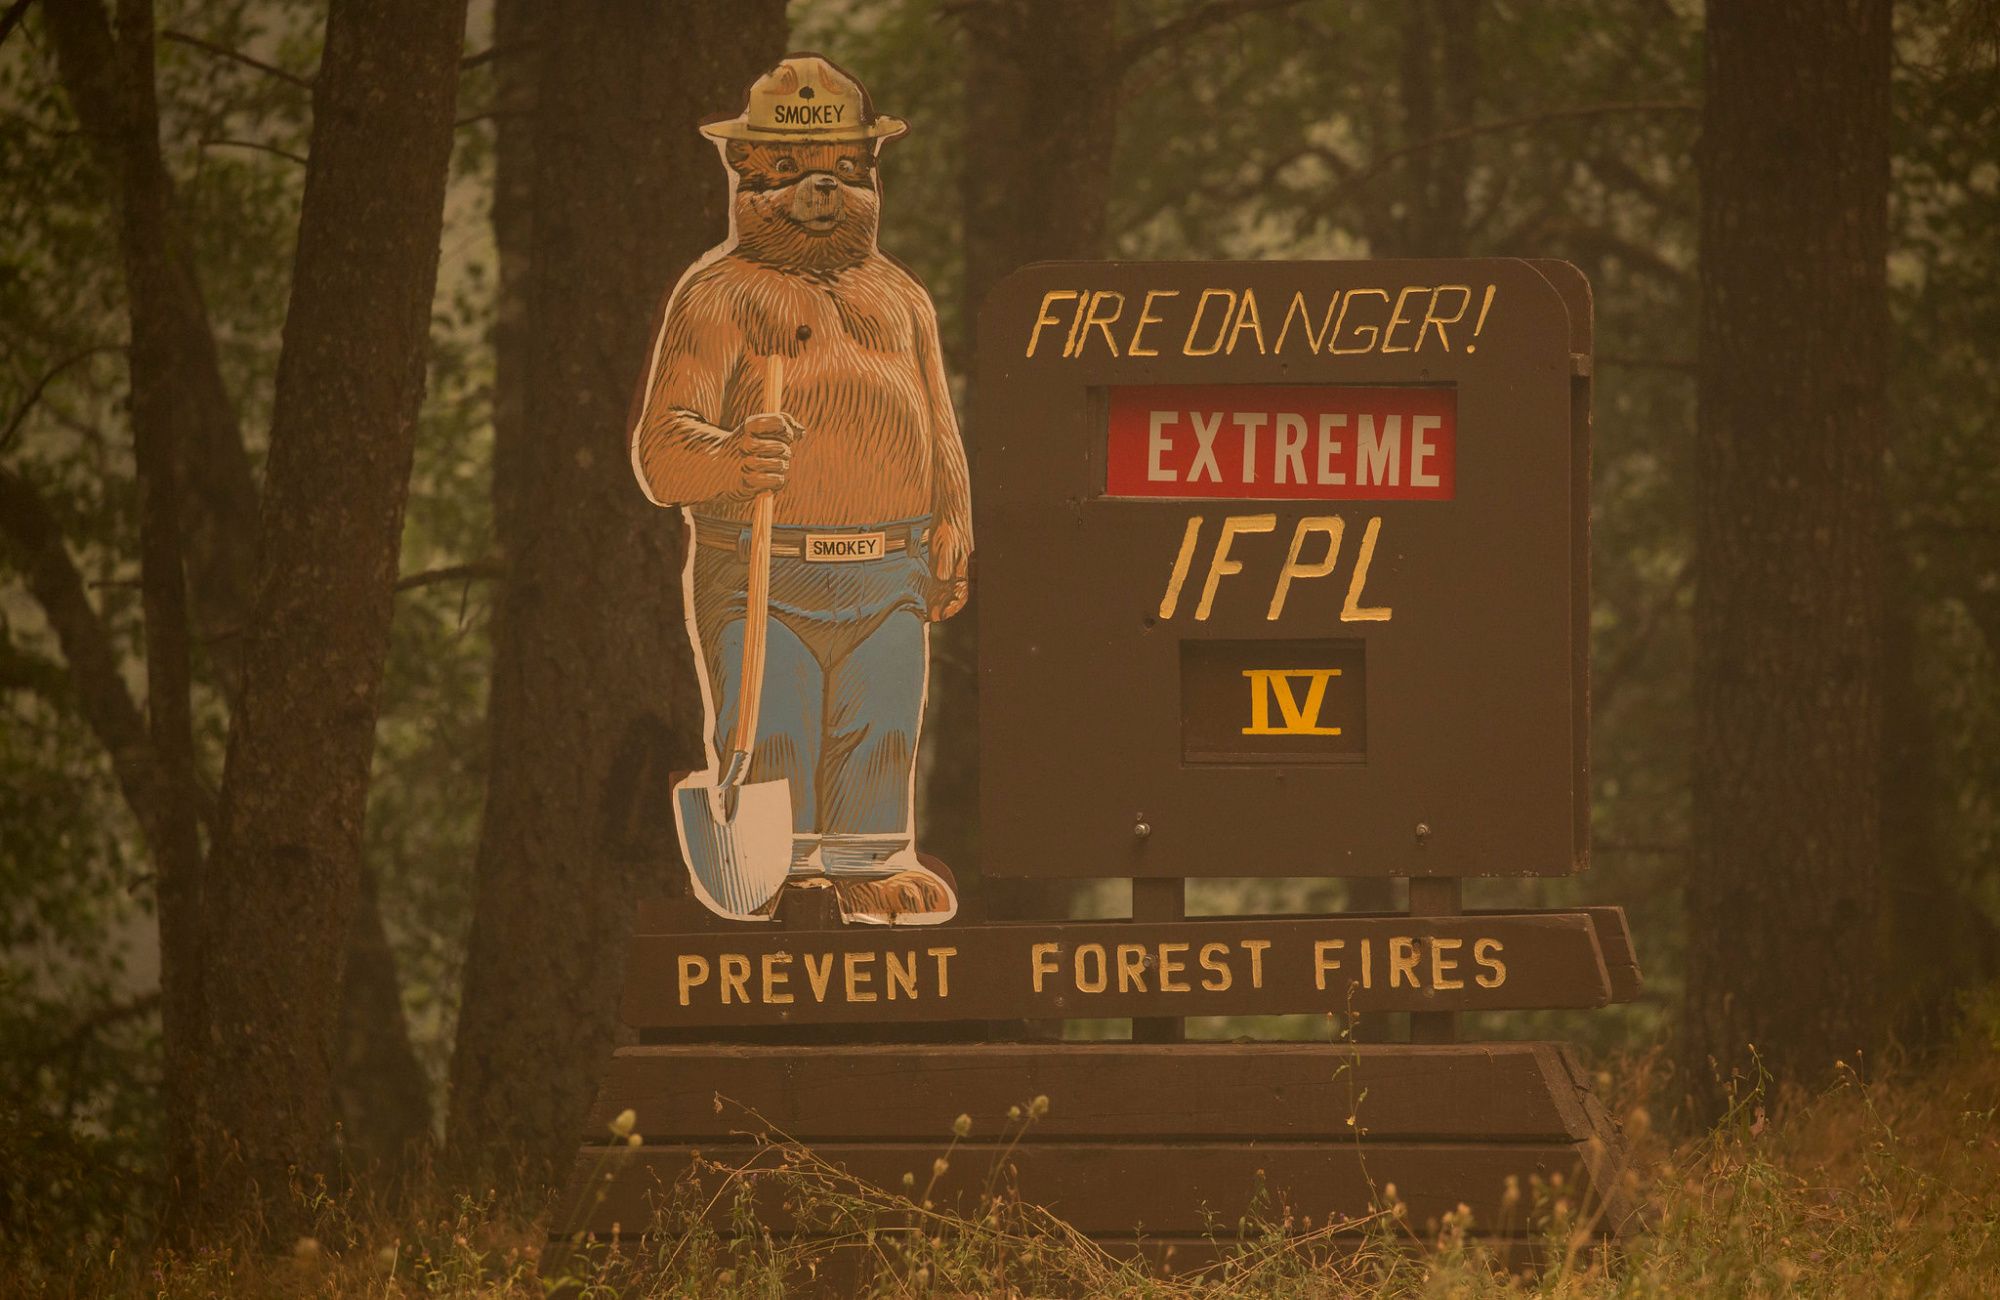 A sign with Smoky the Bear warns of fire risk.